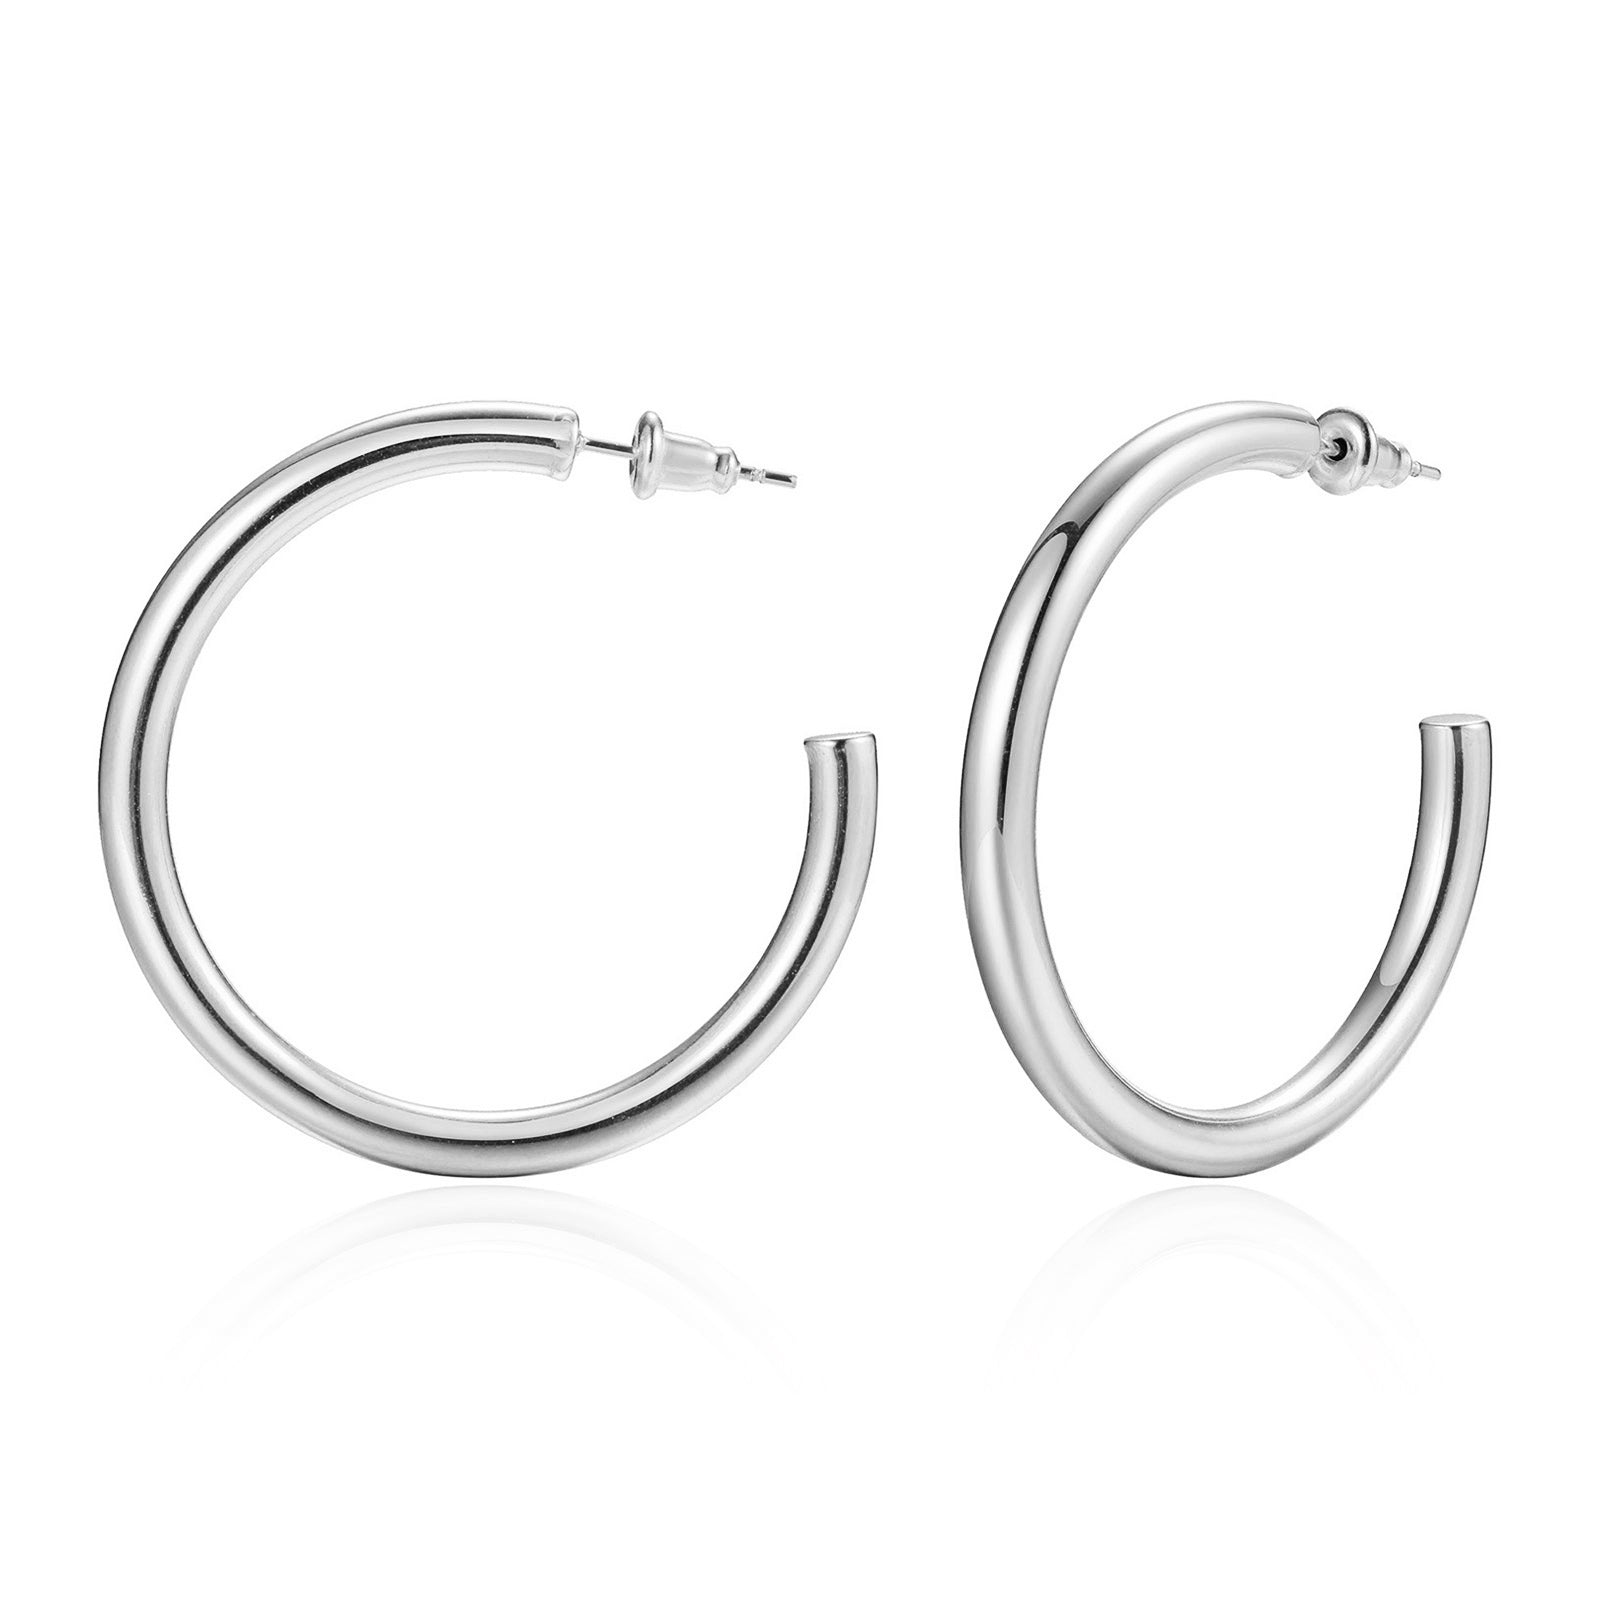 1 Pair Vacation Classic Style Solid Color Polishing Stainless Steel Hoop Earrings By Trendy Jewels